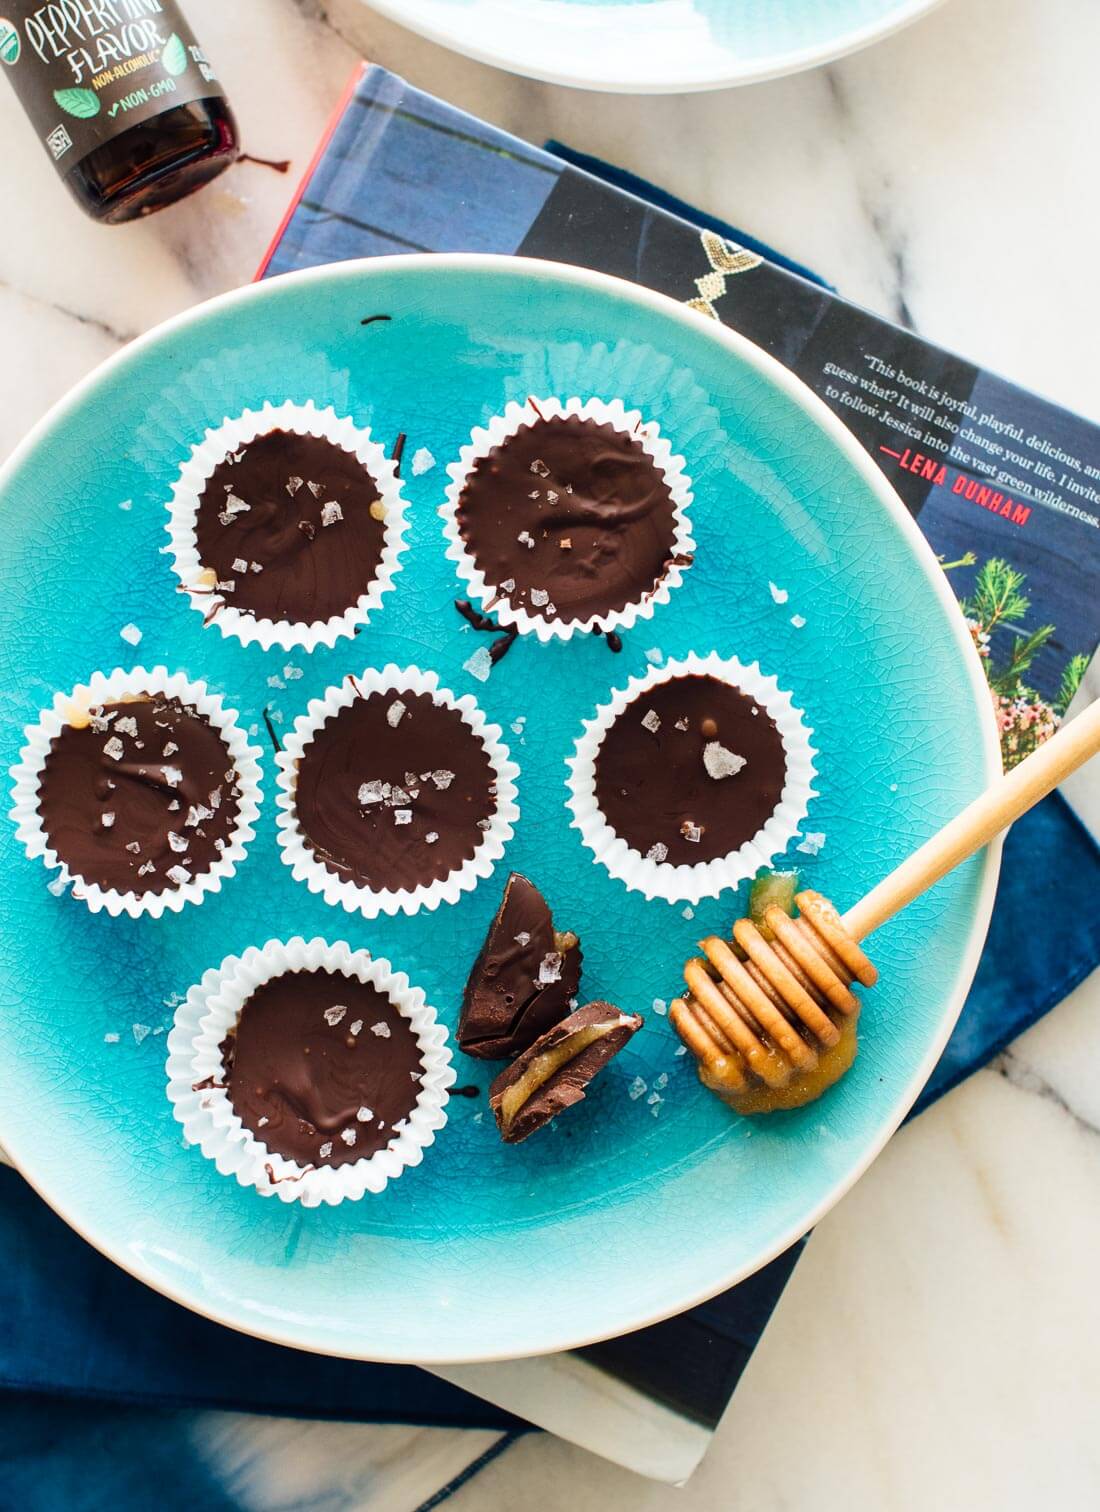 Easy chocolate peppermint cups recipe from Jessica Murnane's new cookbook, One Part Plant